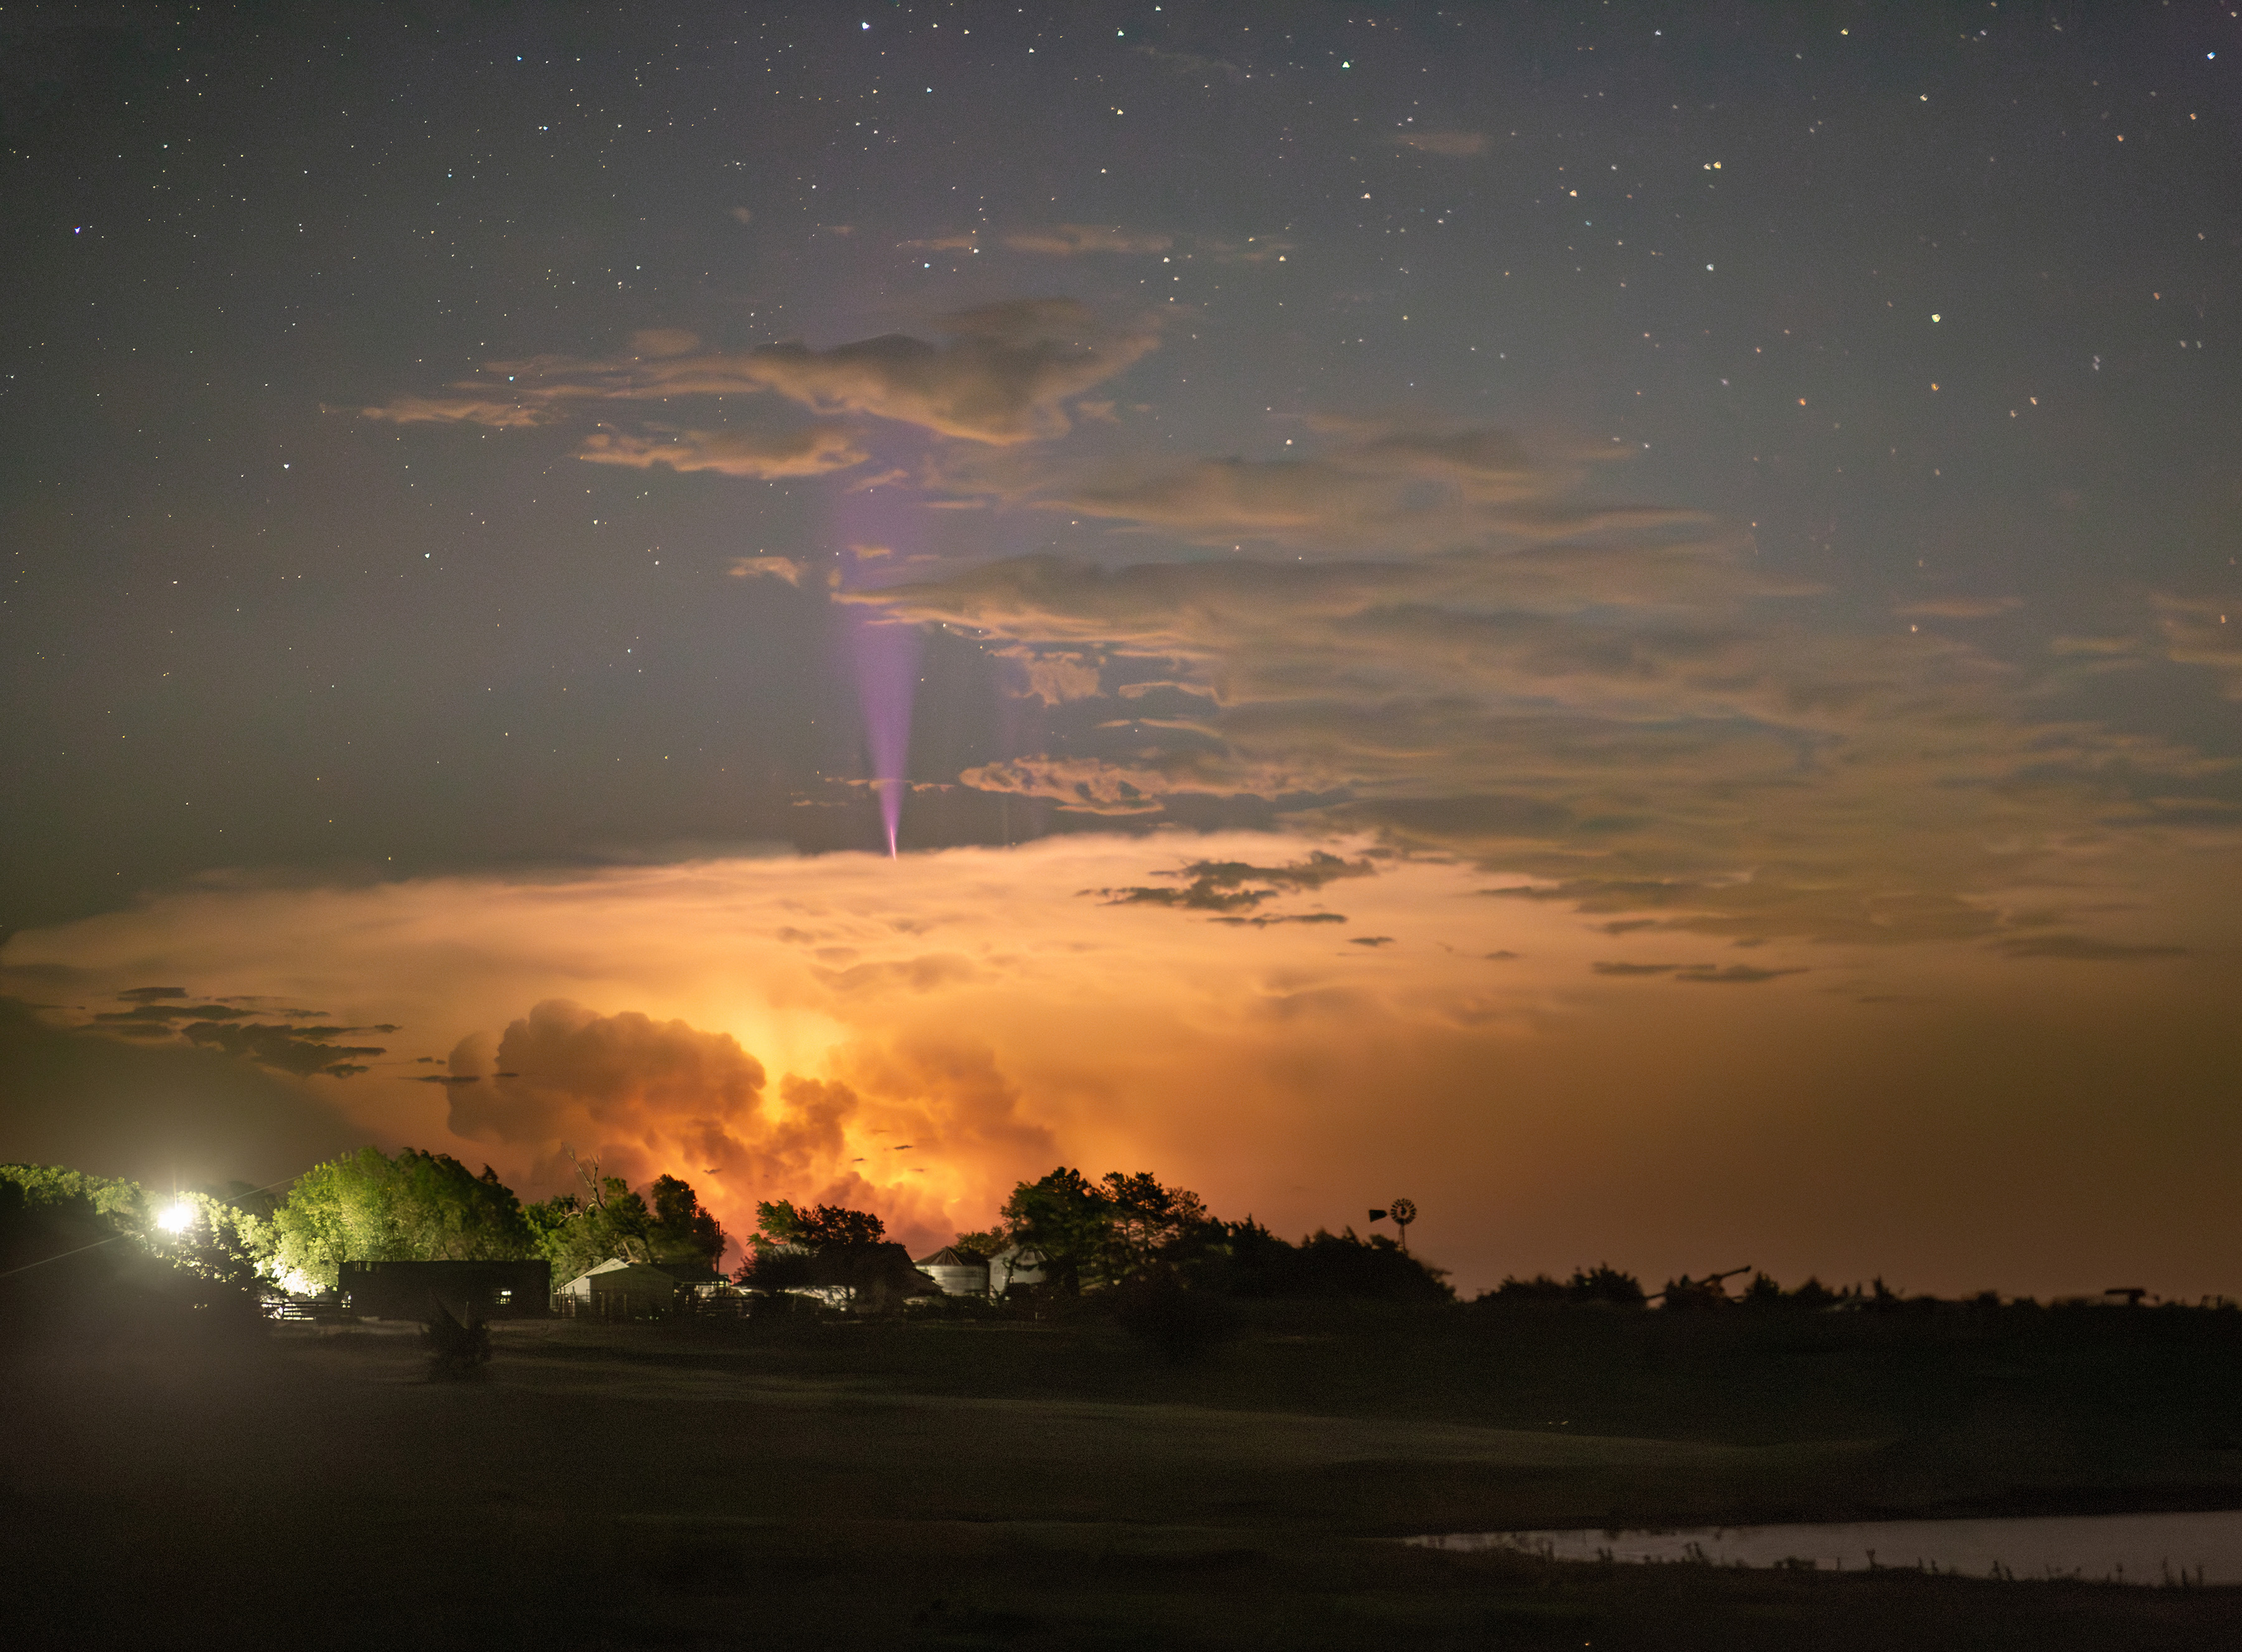 Image of a blue jet rising above a thunderstorm.